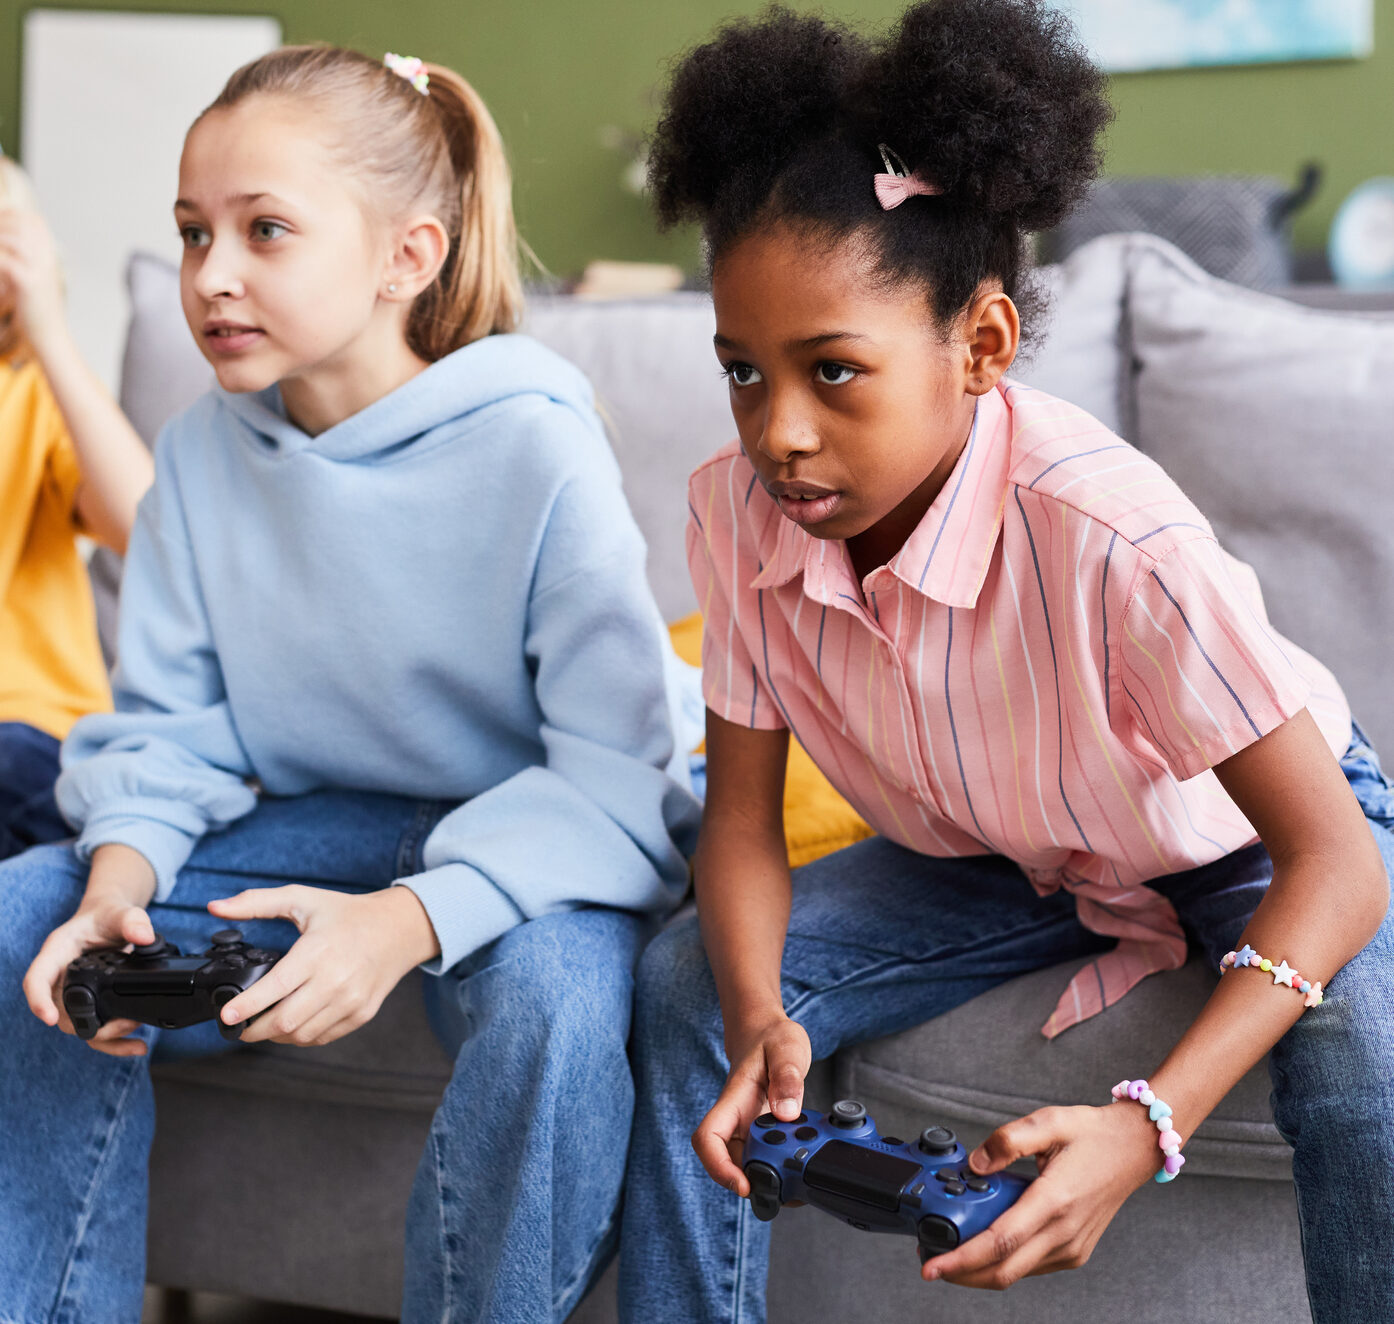 Video Games Can Benefit Your Child's Brain Development